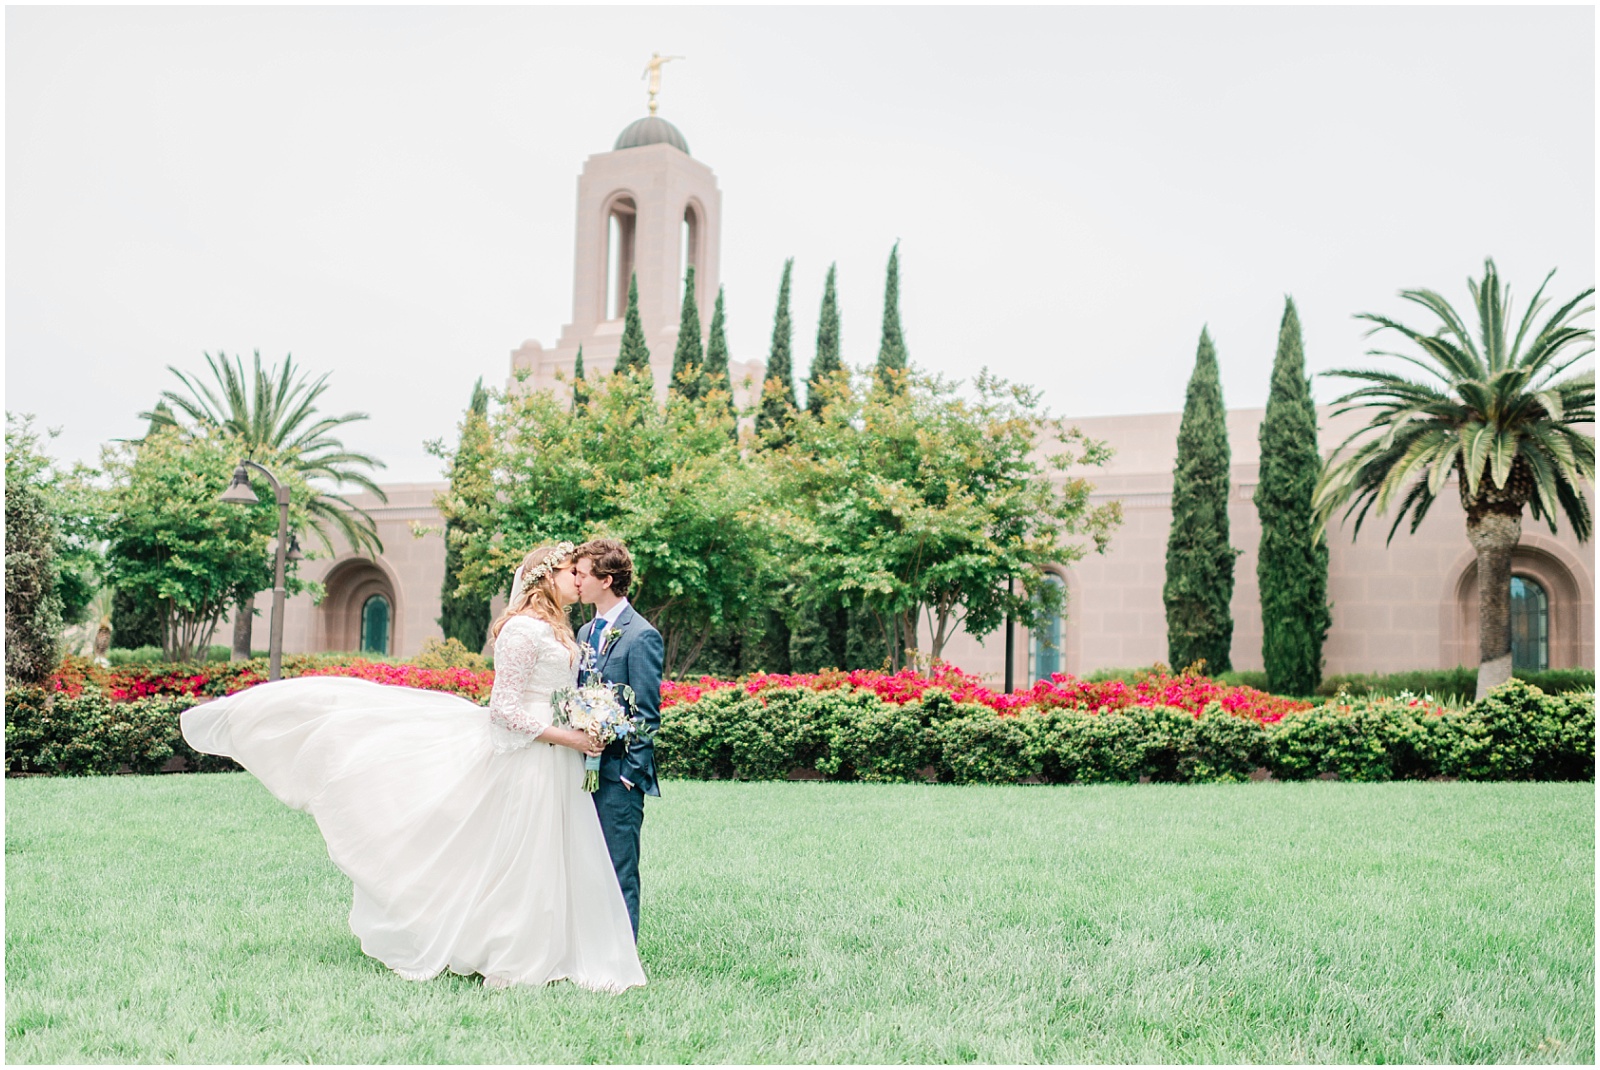 Newport Beach Temple Wedding. Images by Mollie Jane Photography. To see more, go to www.molliejanephotography.com.